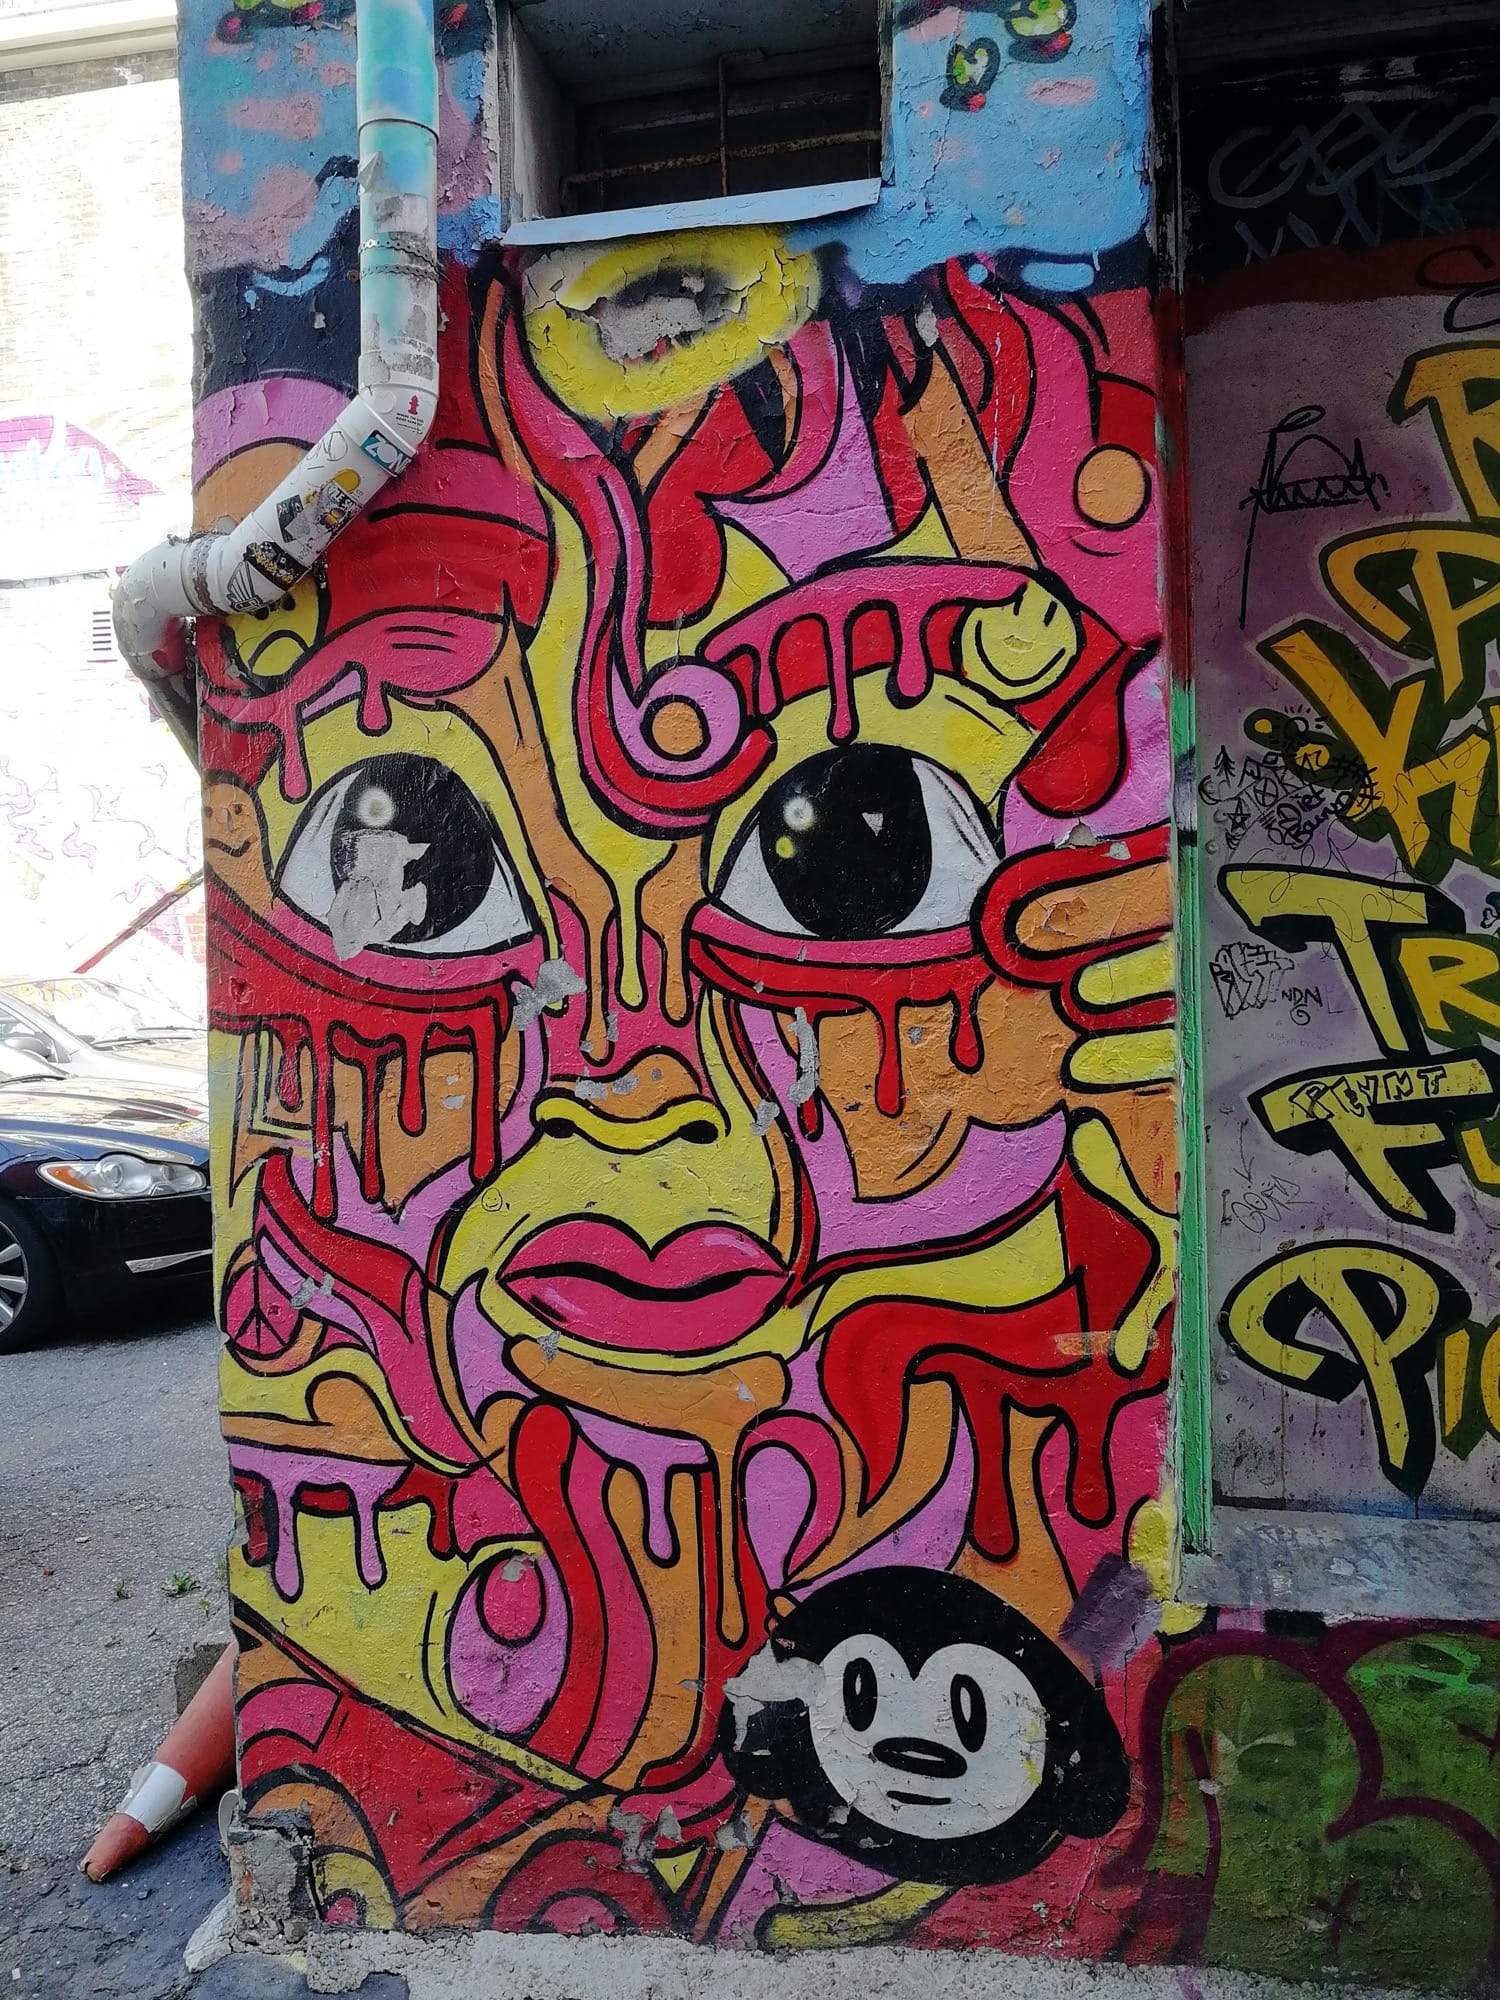 Graffiti 2492  captured by Rabot in Toronto Canada